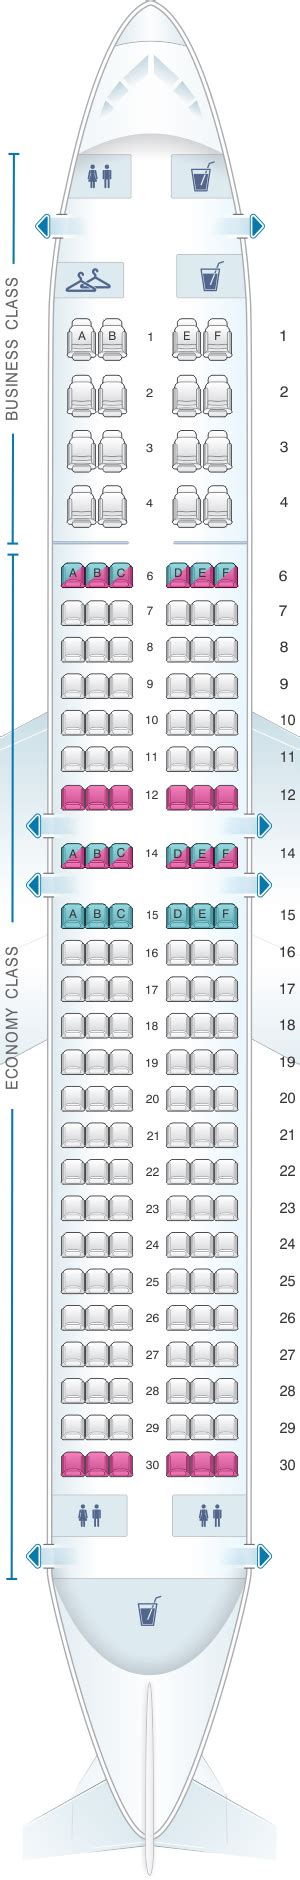 aeromexico boeing 737-800 seating chart